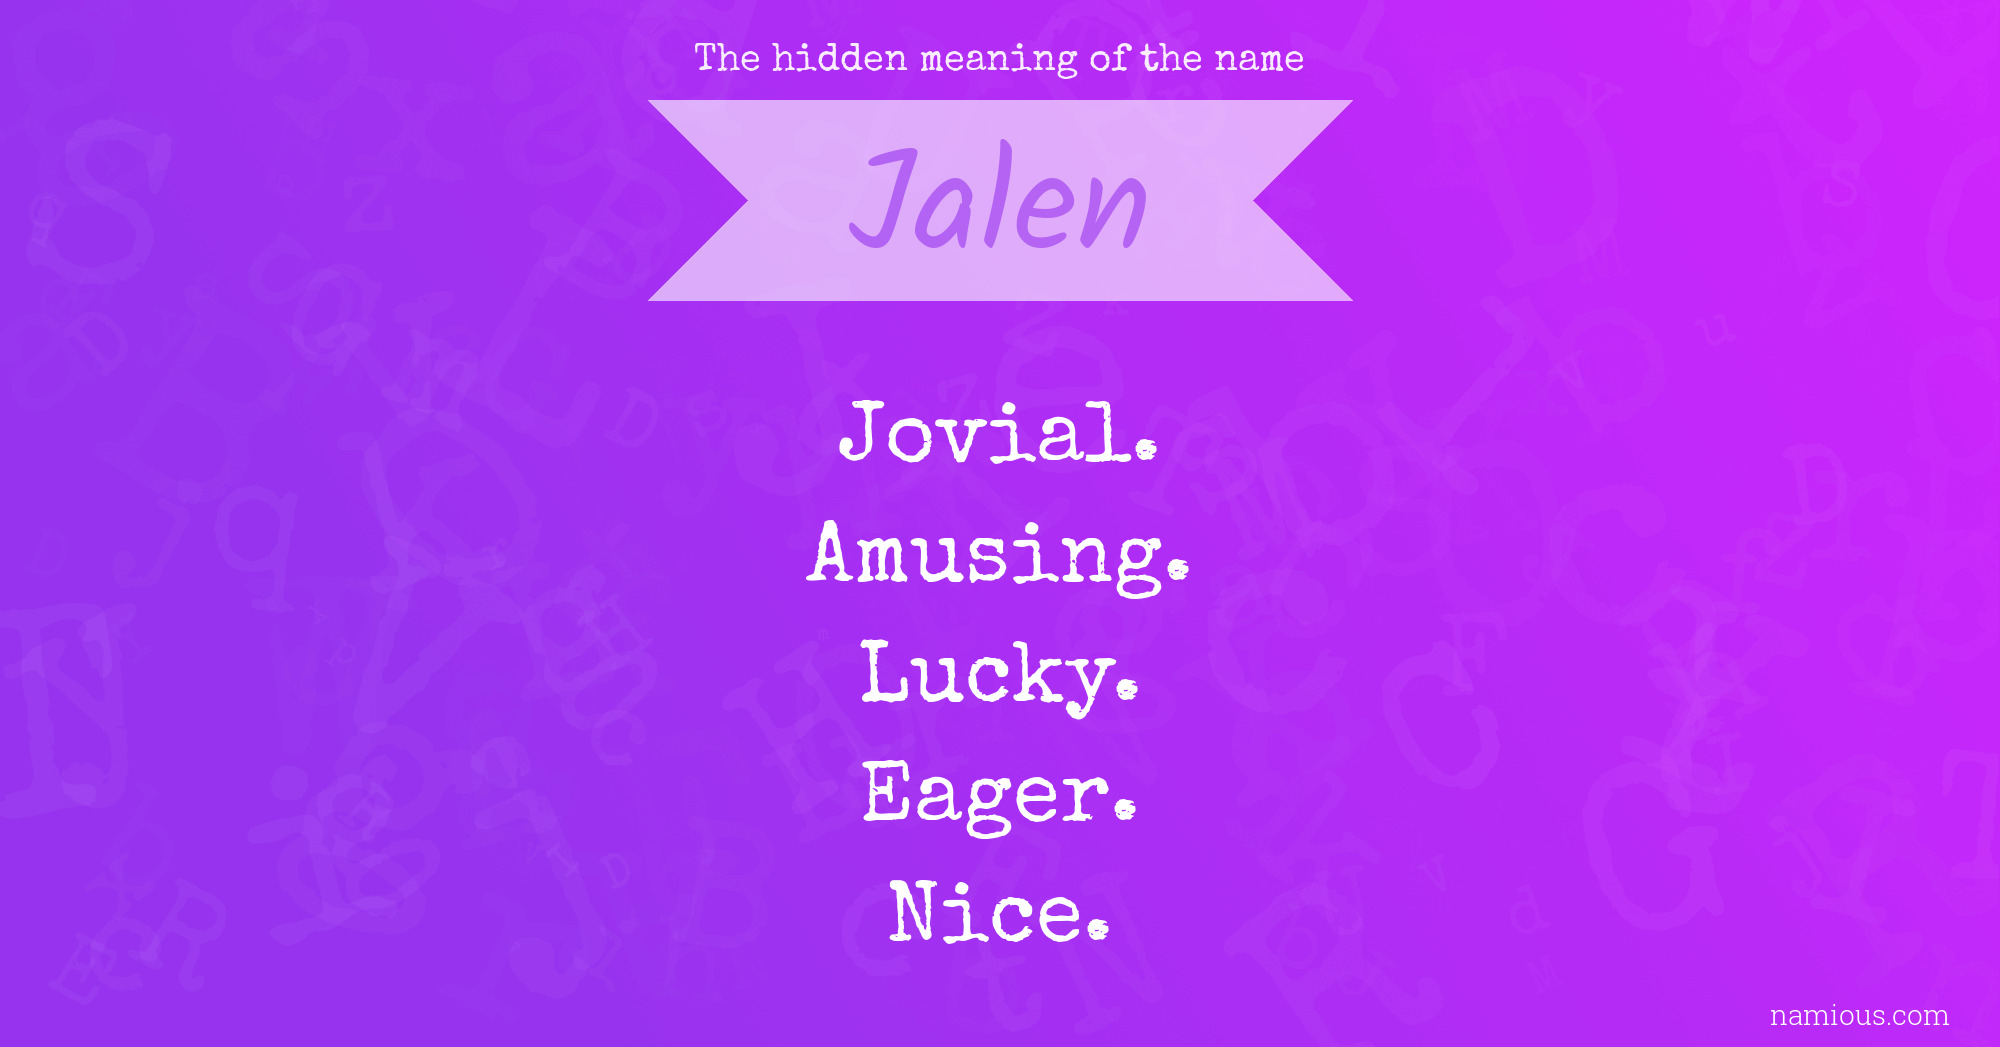 The hidden meaning of the name Jalen